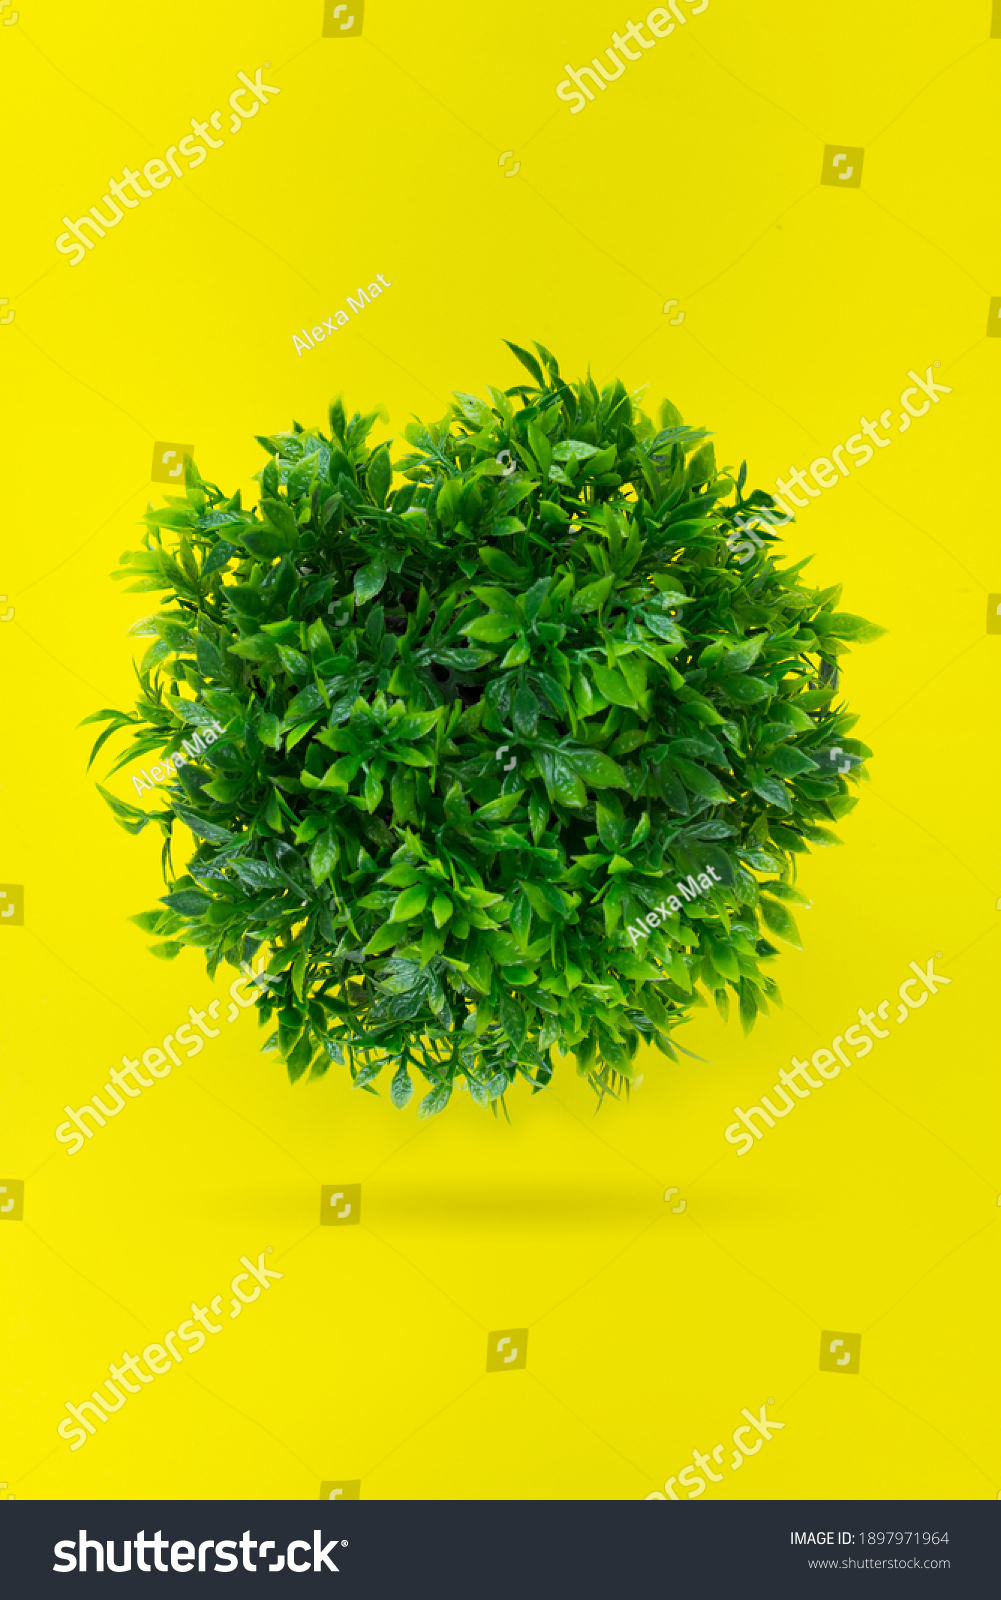 Green grassy ball, Leaf covered Earth on a yellow background. Concept day earth. Environmentally friendly planet #1897971964